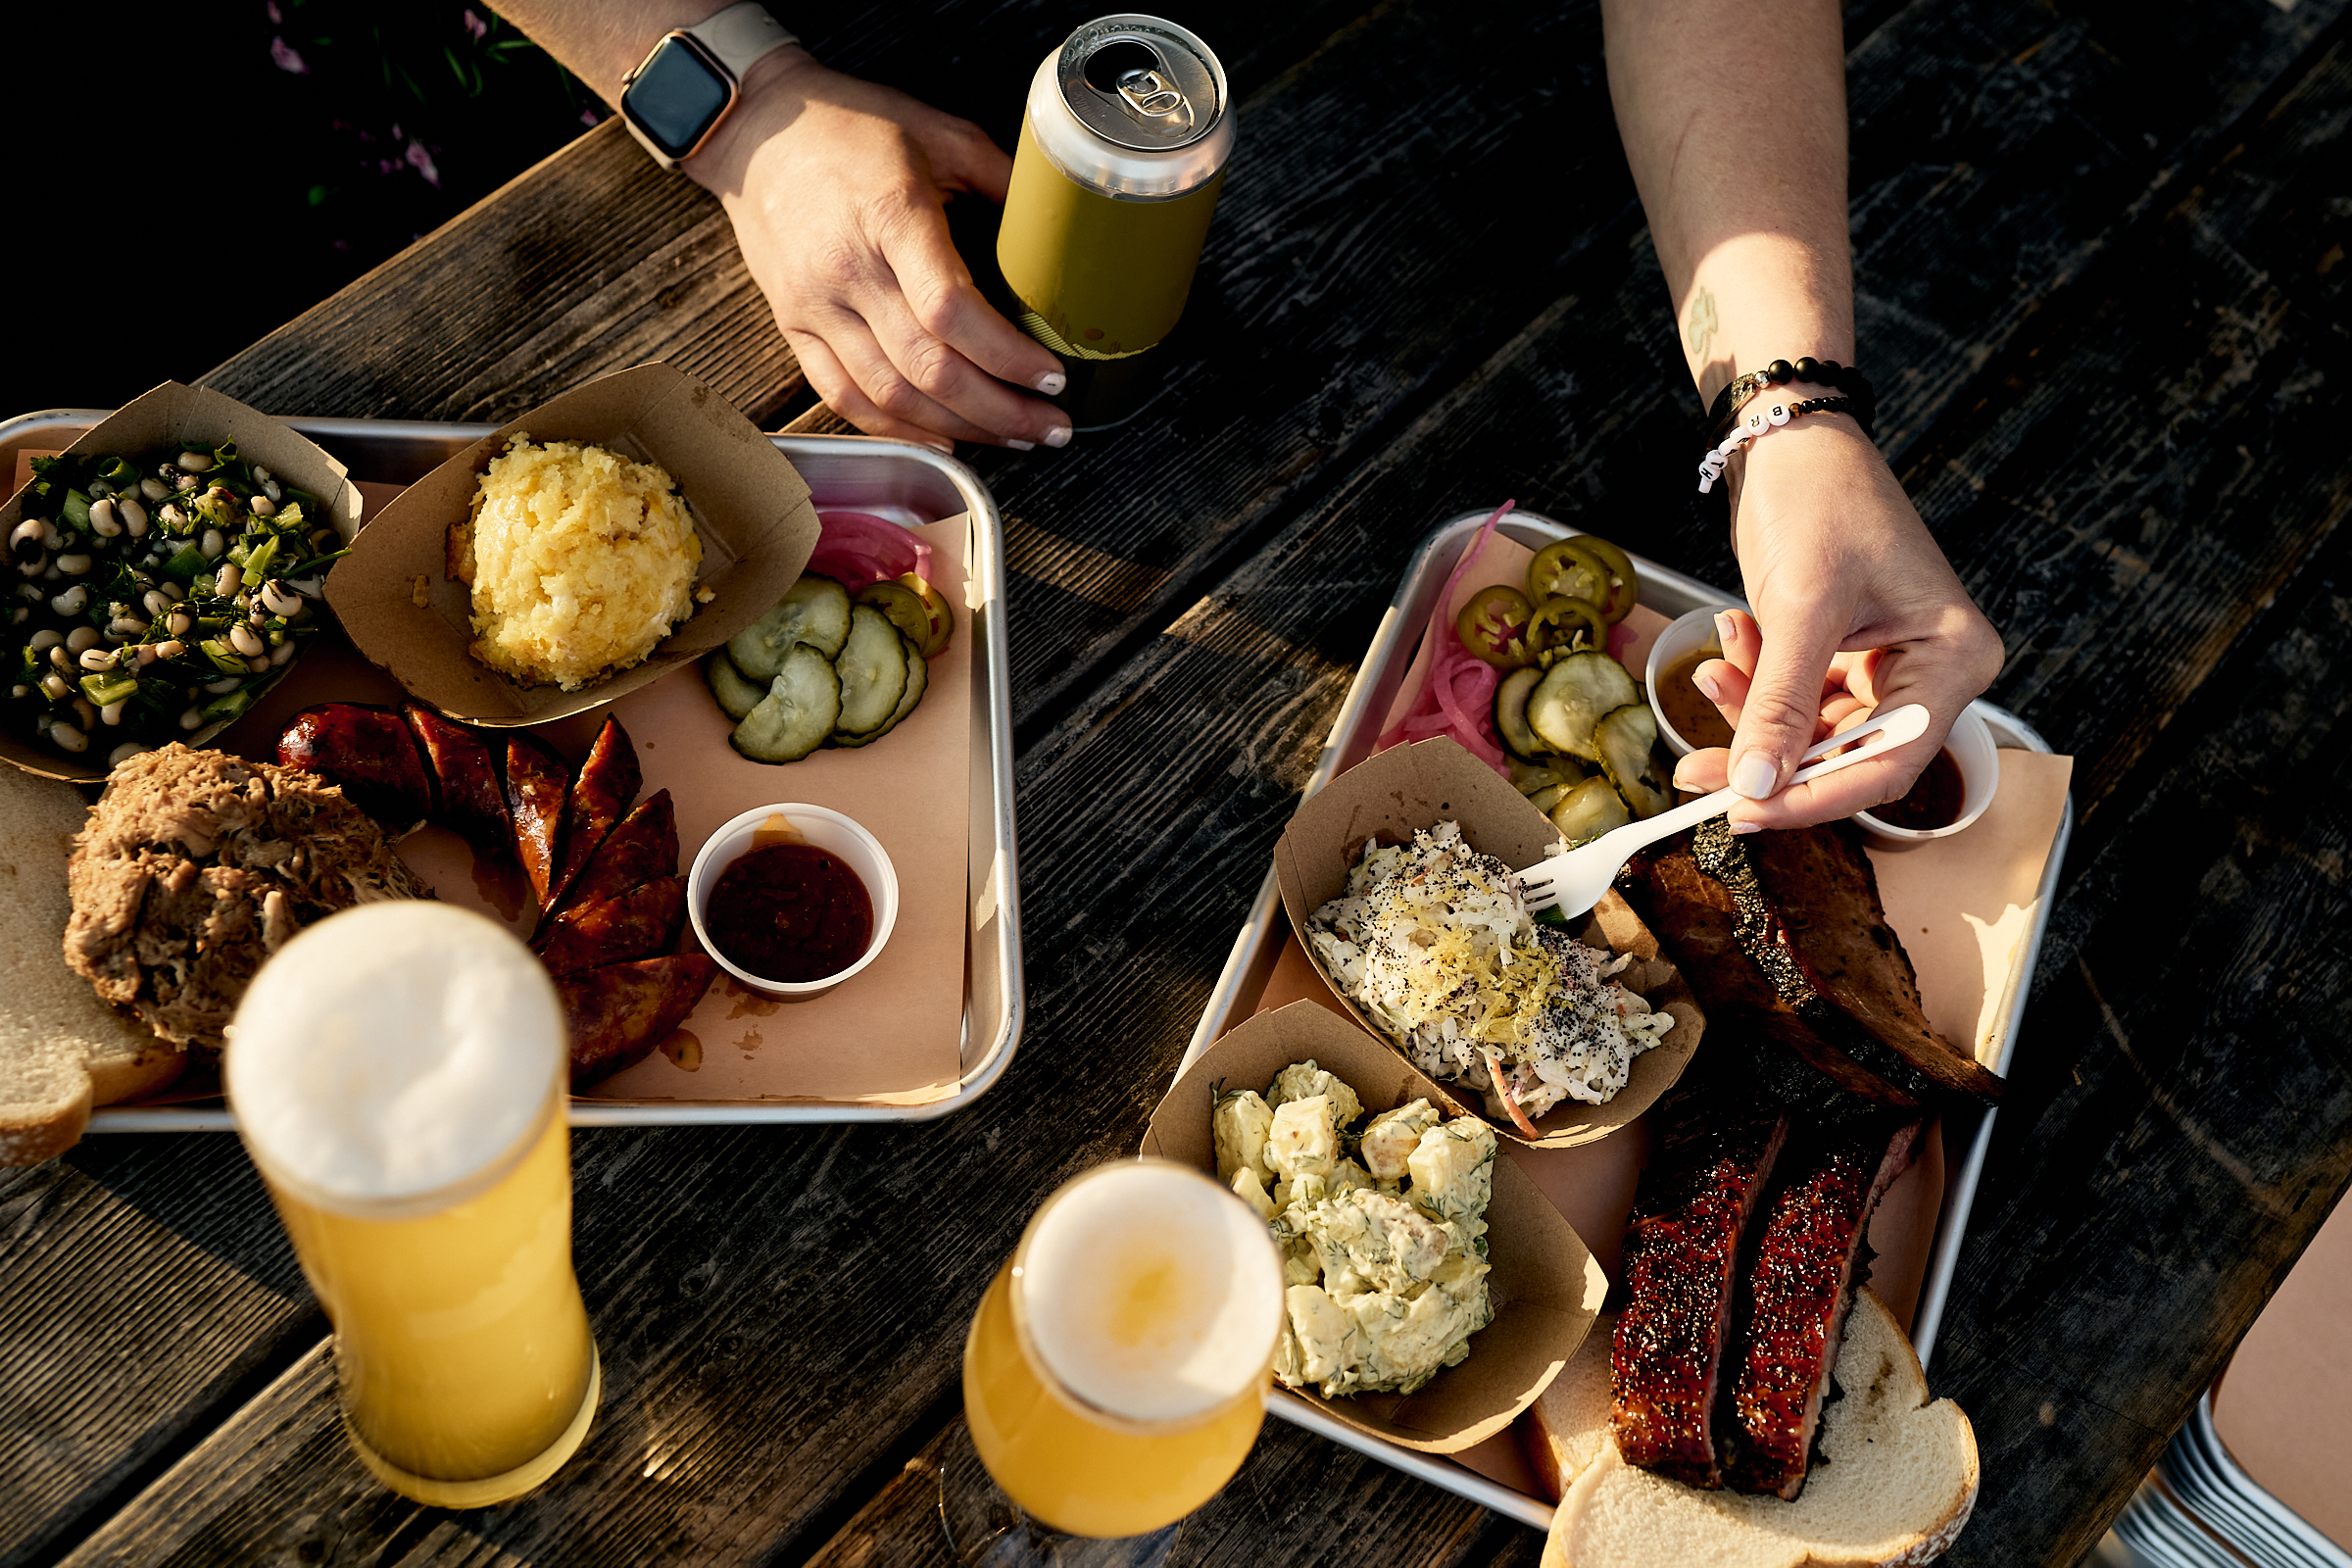 In a top-down view, two trays filled with barbecued meats and side dishes sit on a wooden table next to two glasses and one can of beer; a hand holds the can of beer while another hand reaches for some food with a plastic fork.